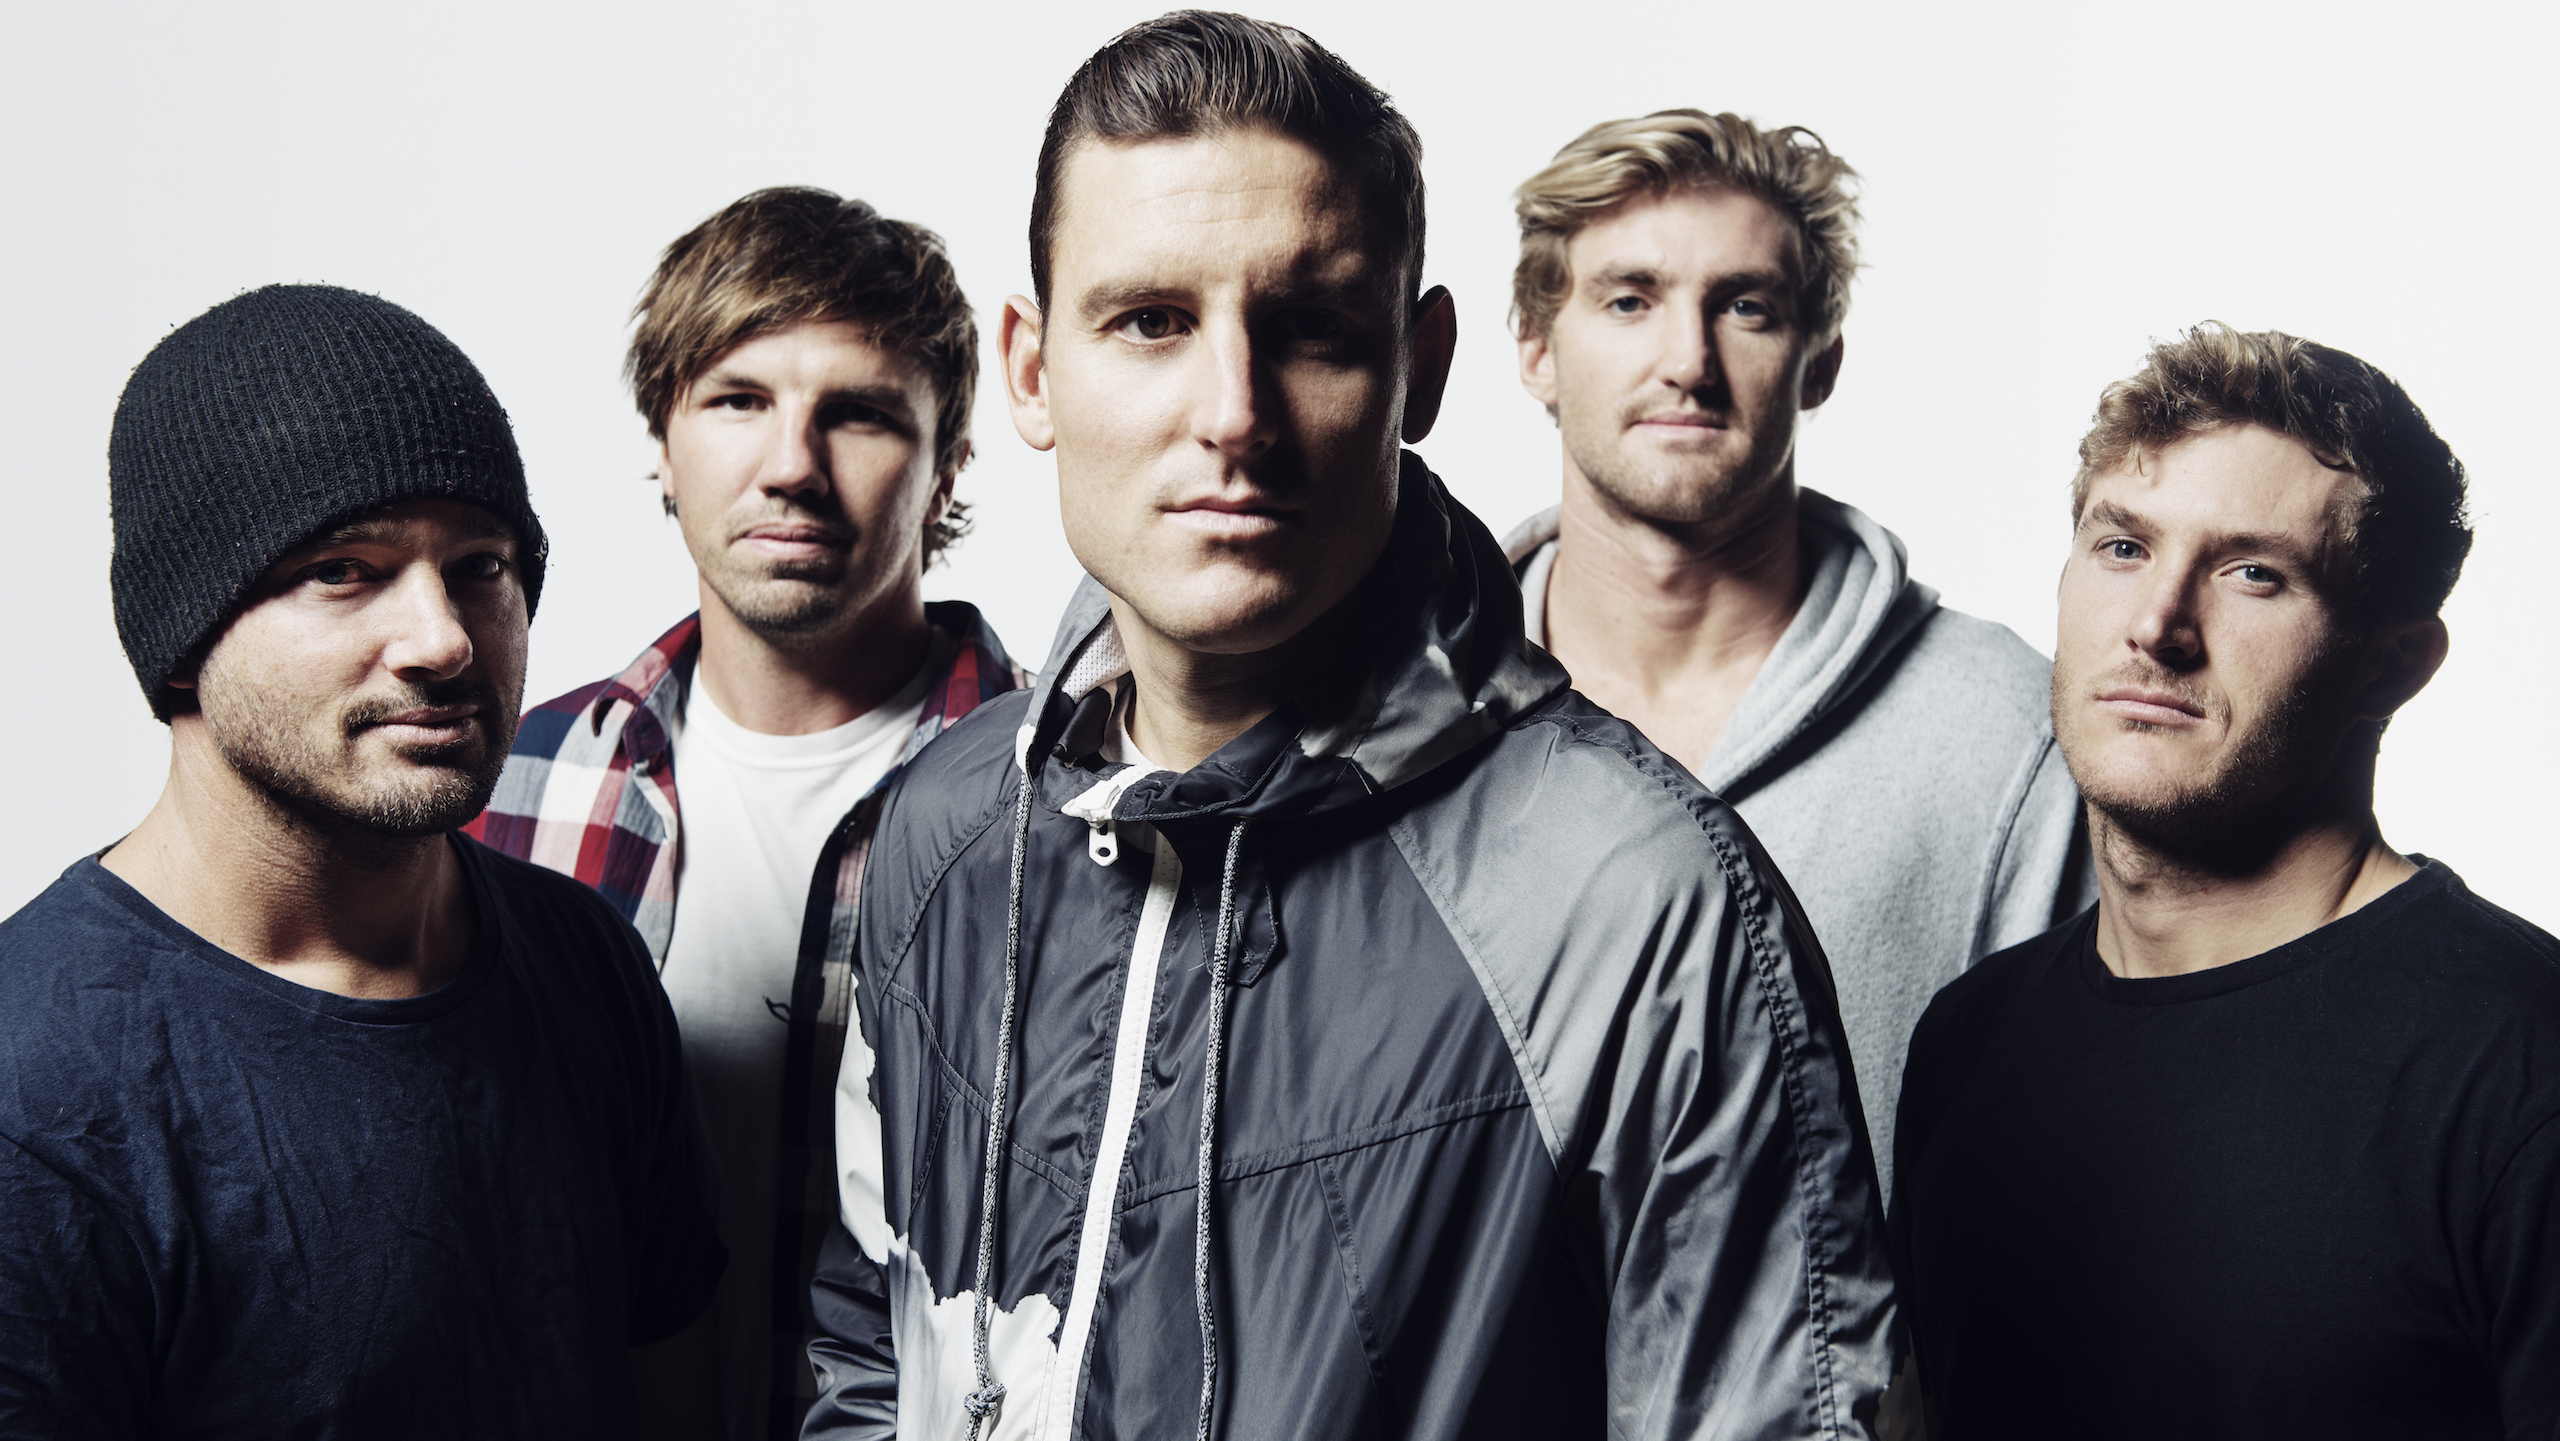 Parkway Drive: albums, songs, playlists